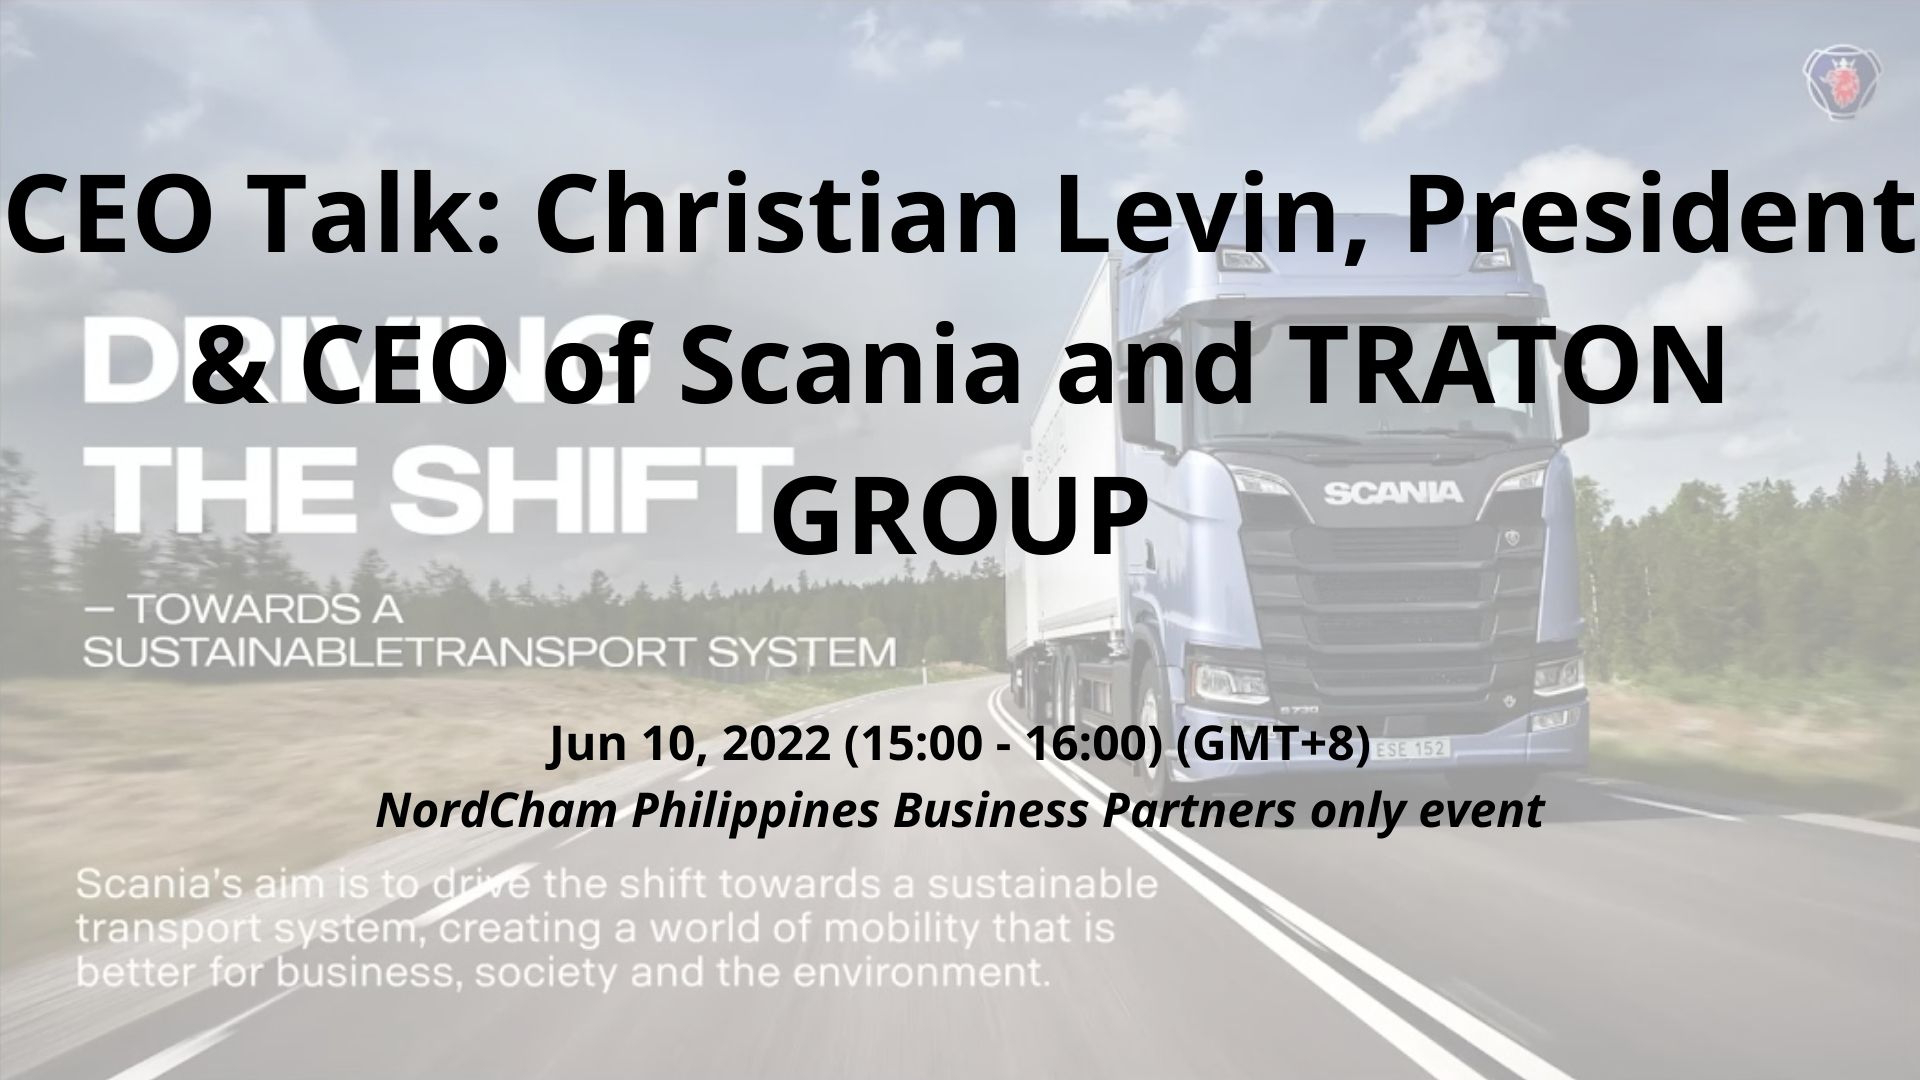 thumbnails CEO Talk: Christian Levin, President & CEO of Scania and TRATON GROUP